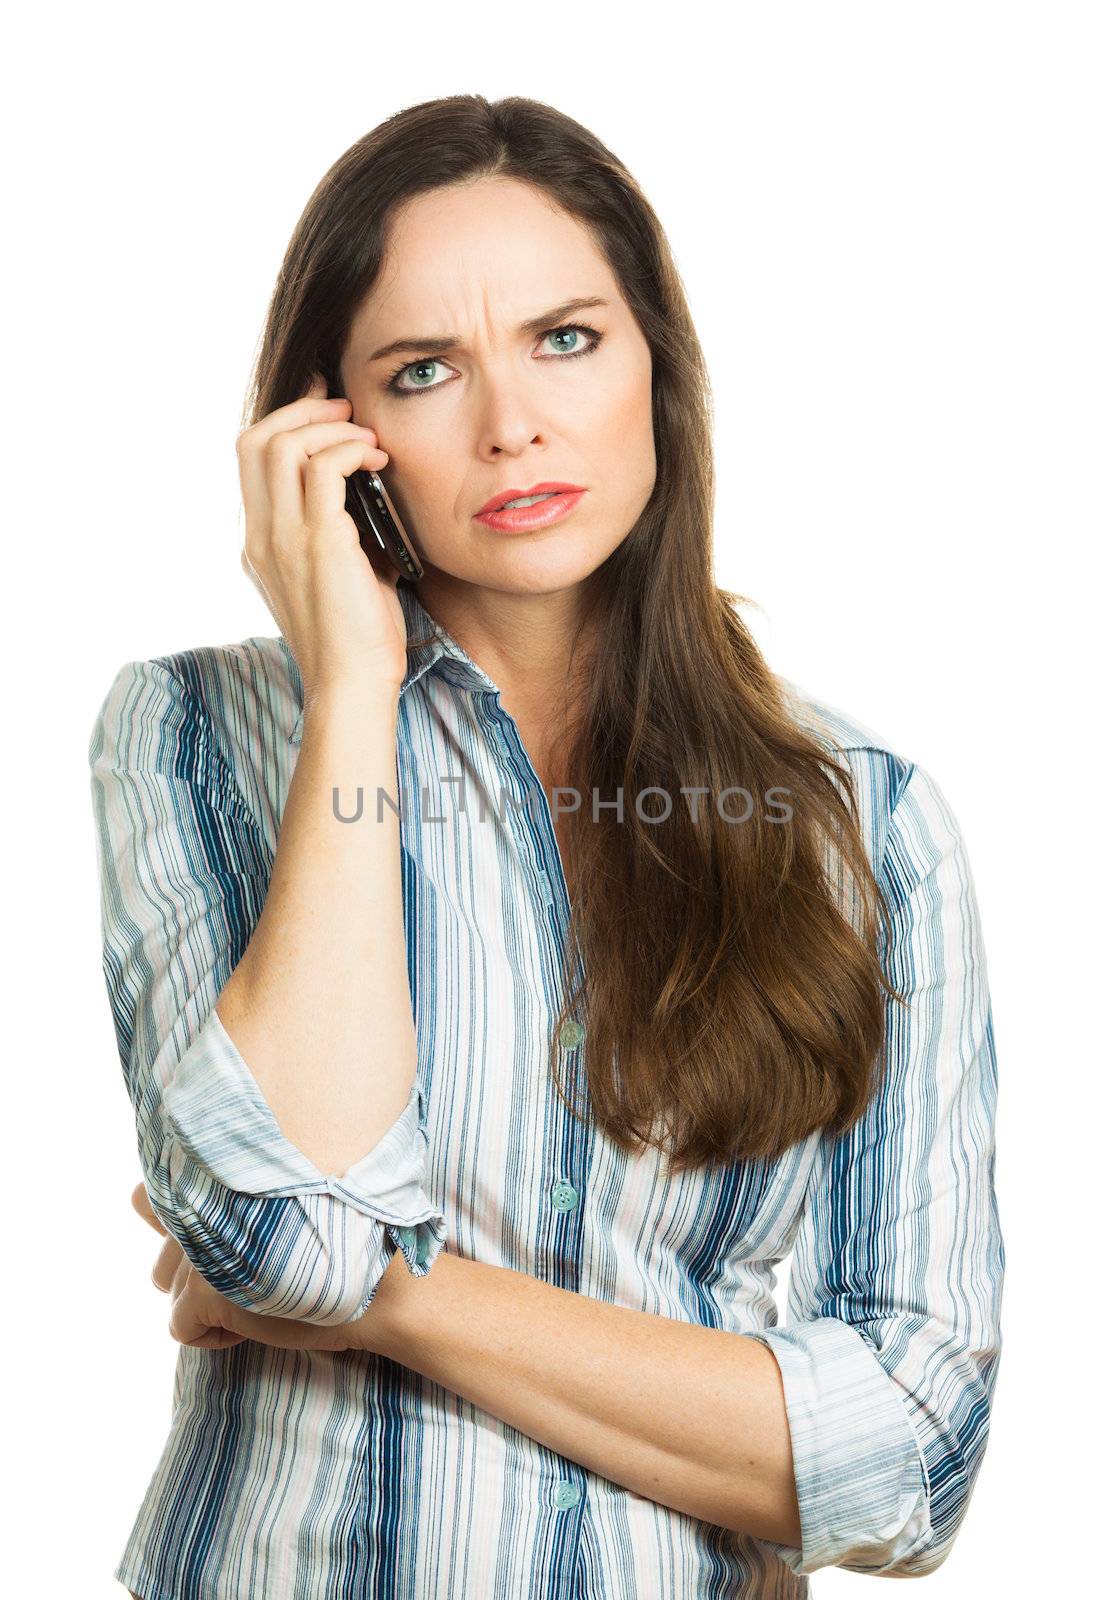 Annoyed woman on the phone by Jaykayl